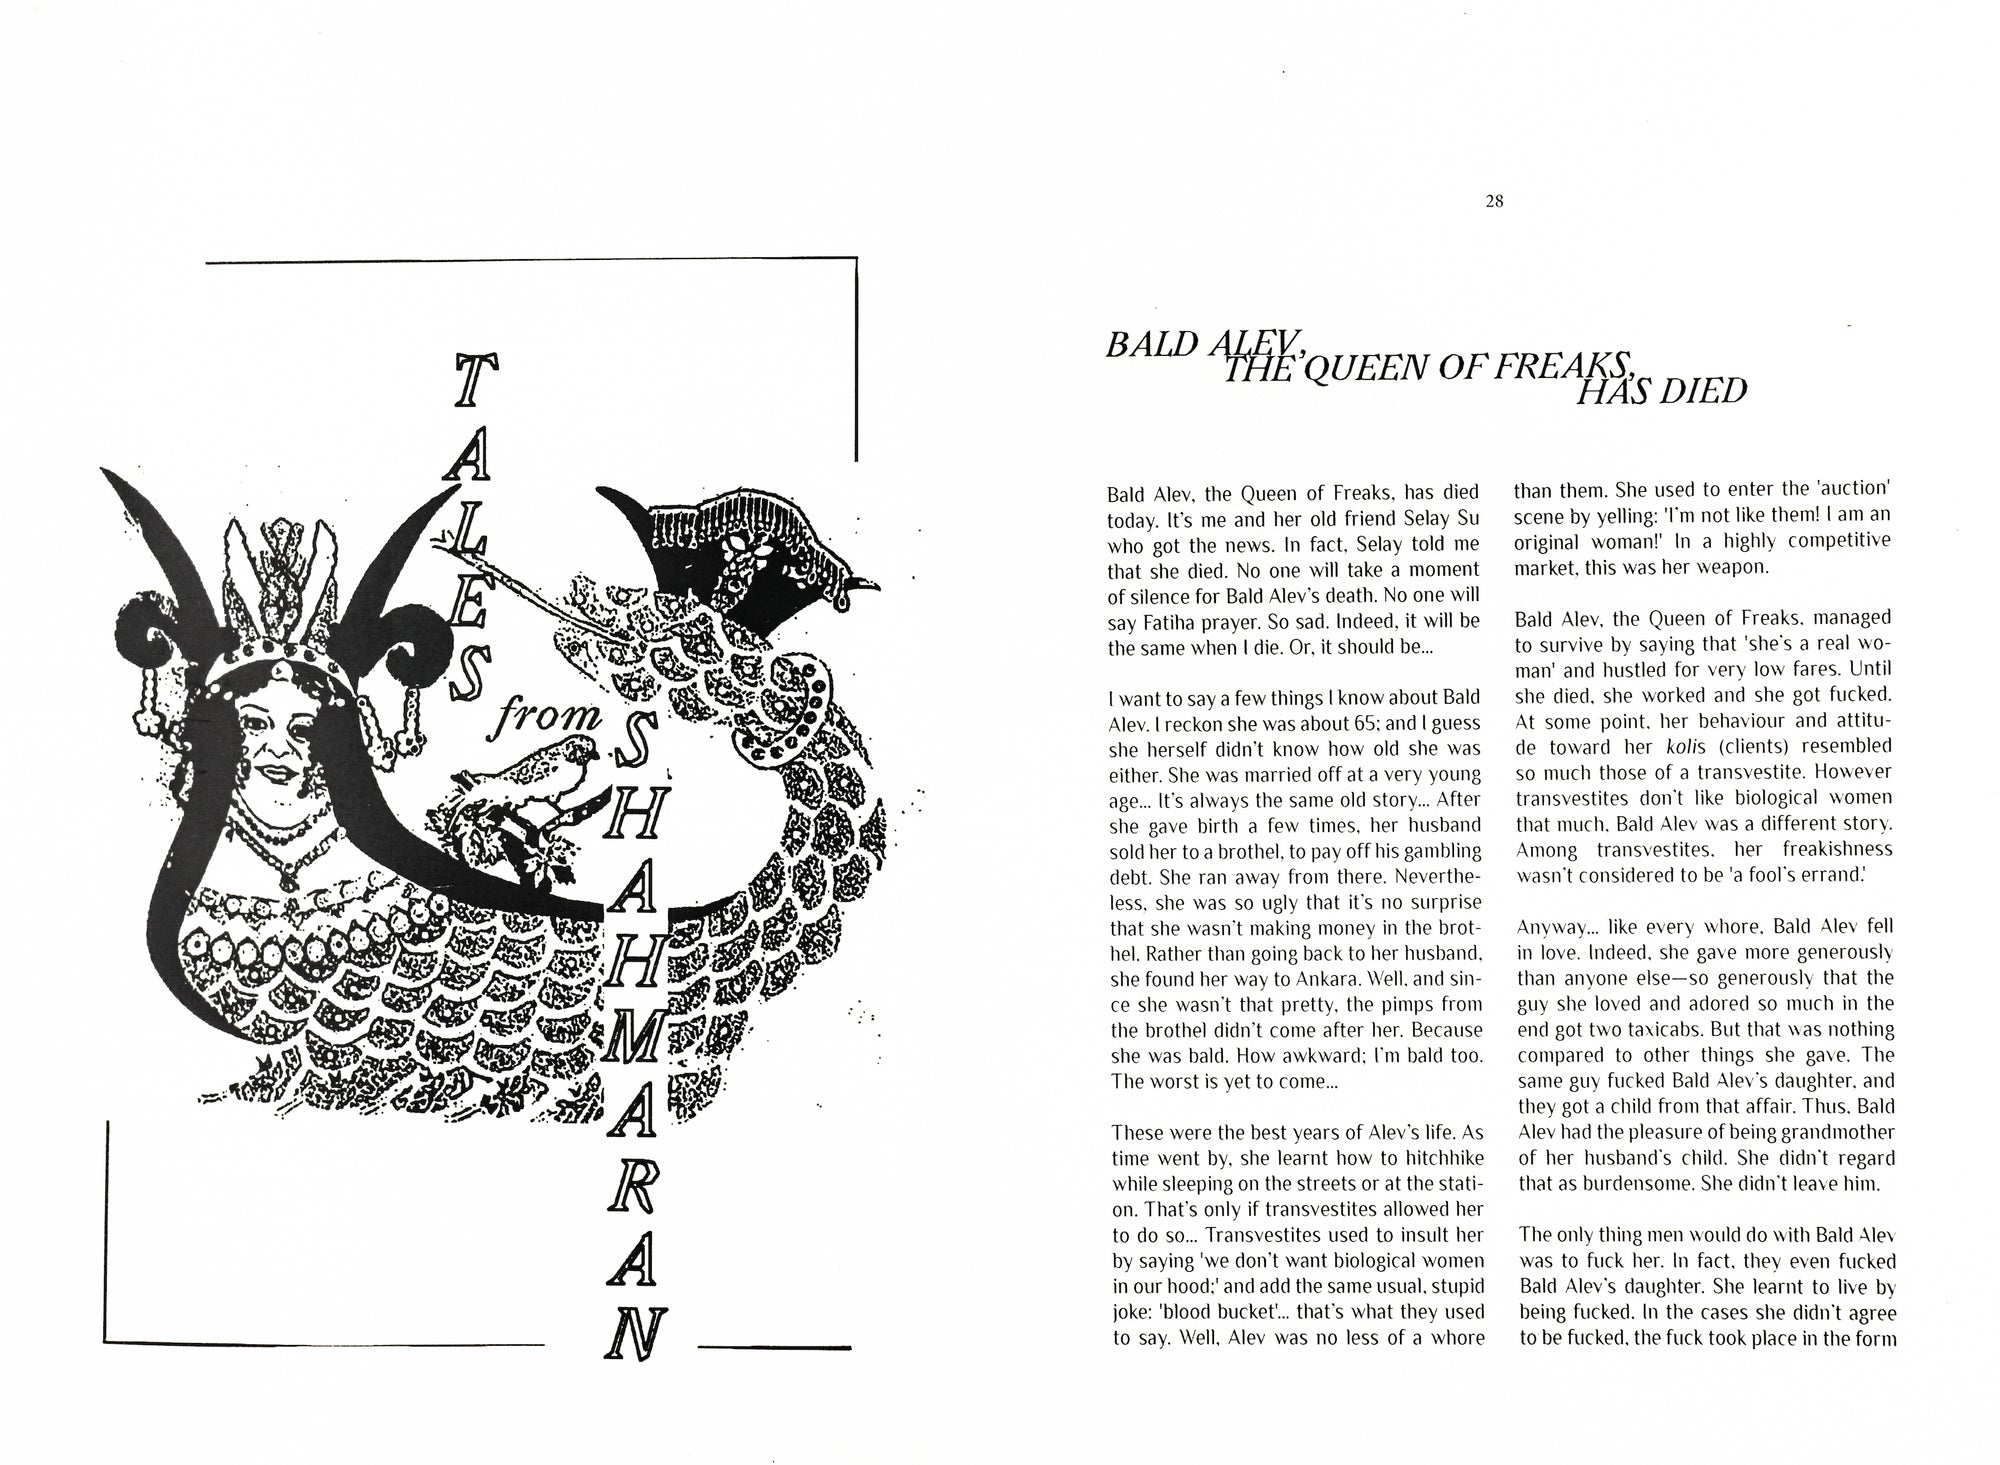 Text written in English on the write, and on the left an illustration of a long-haired figure merged with a serpent on the right.